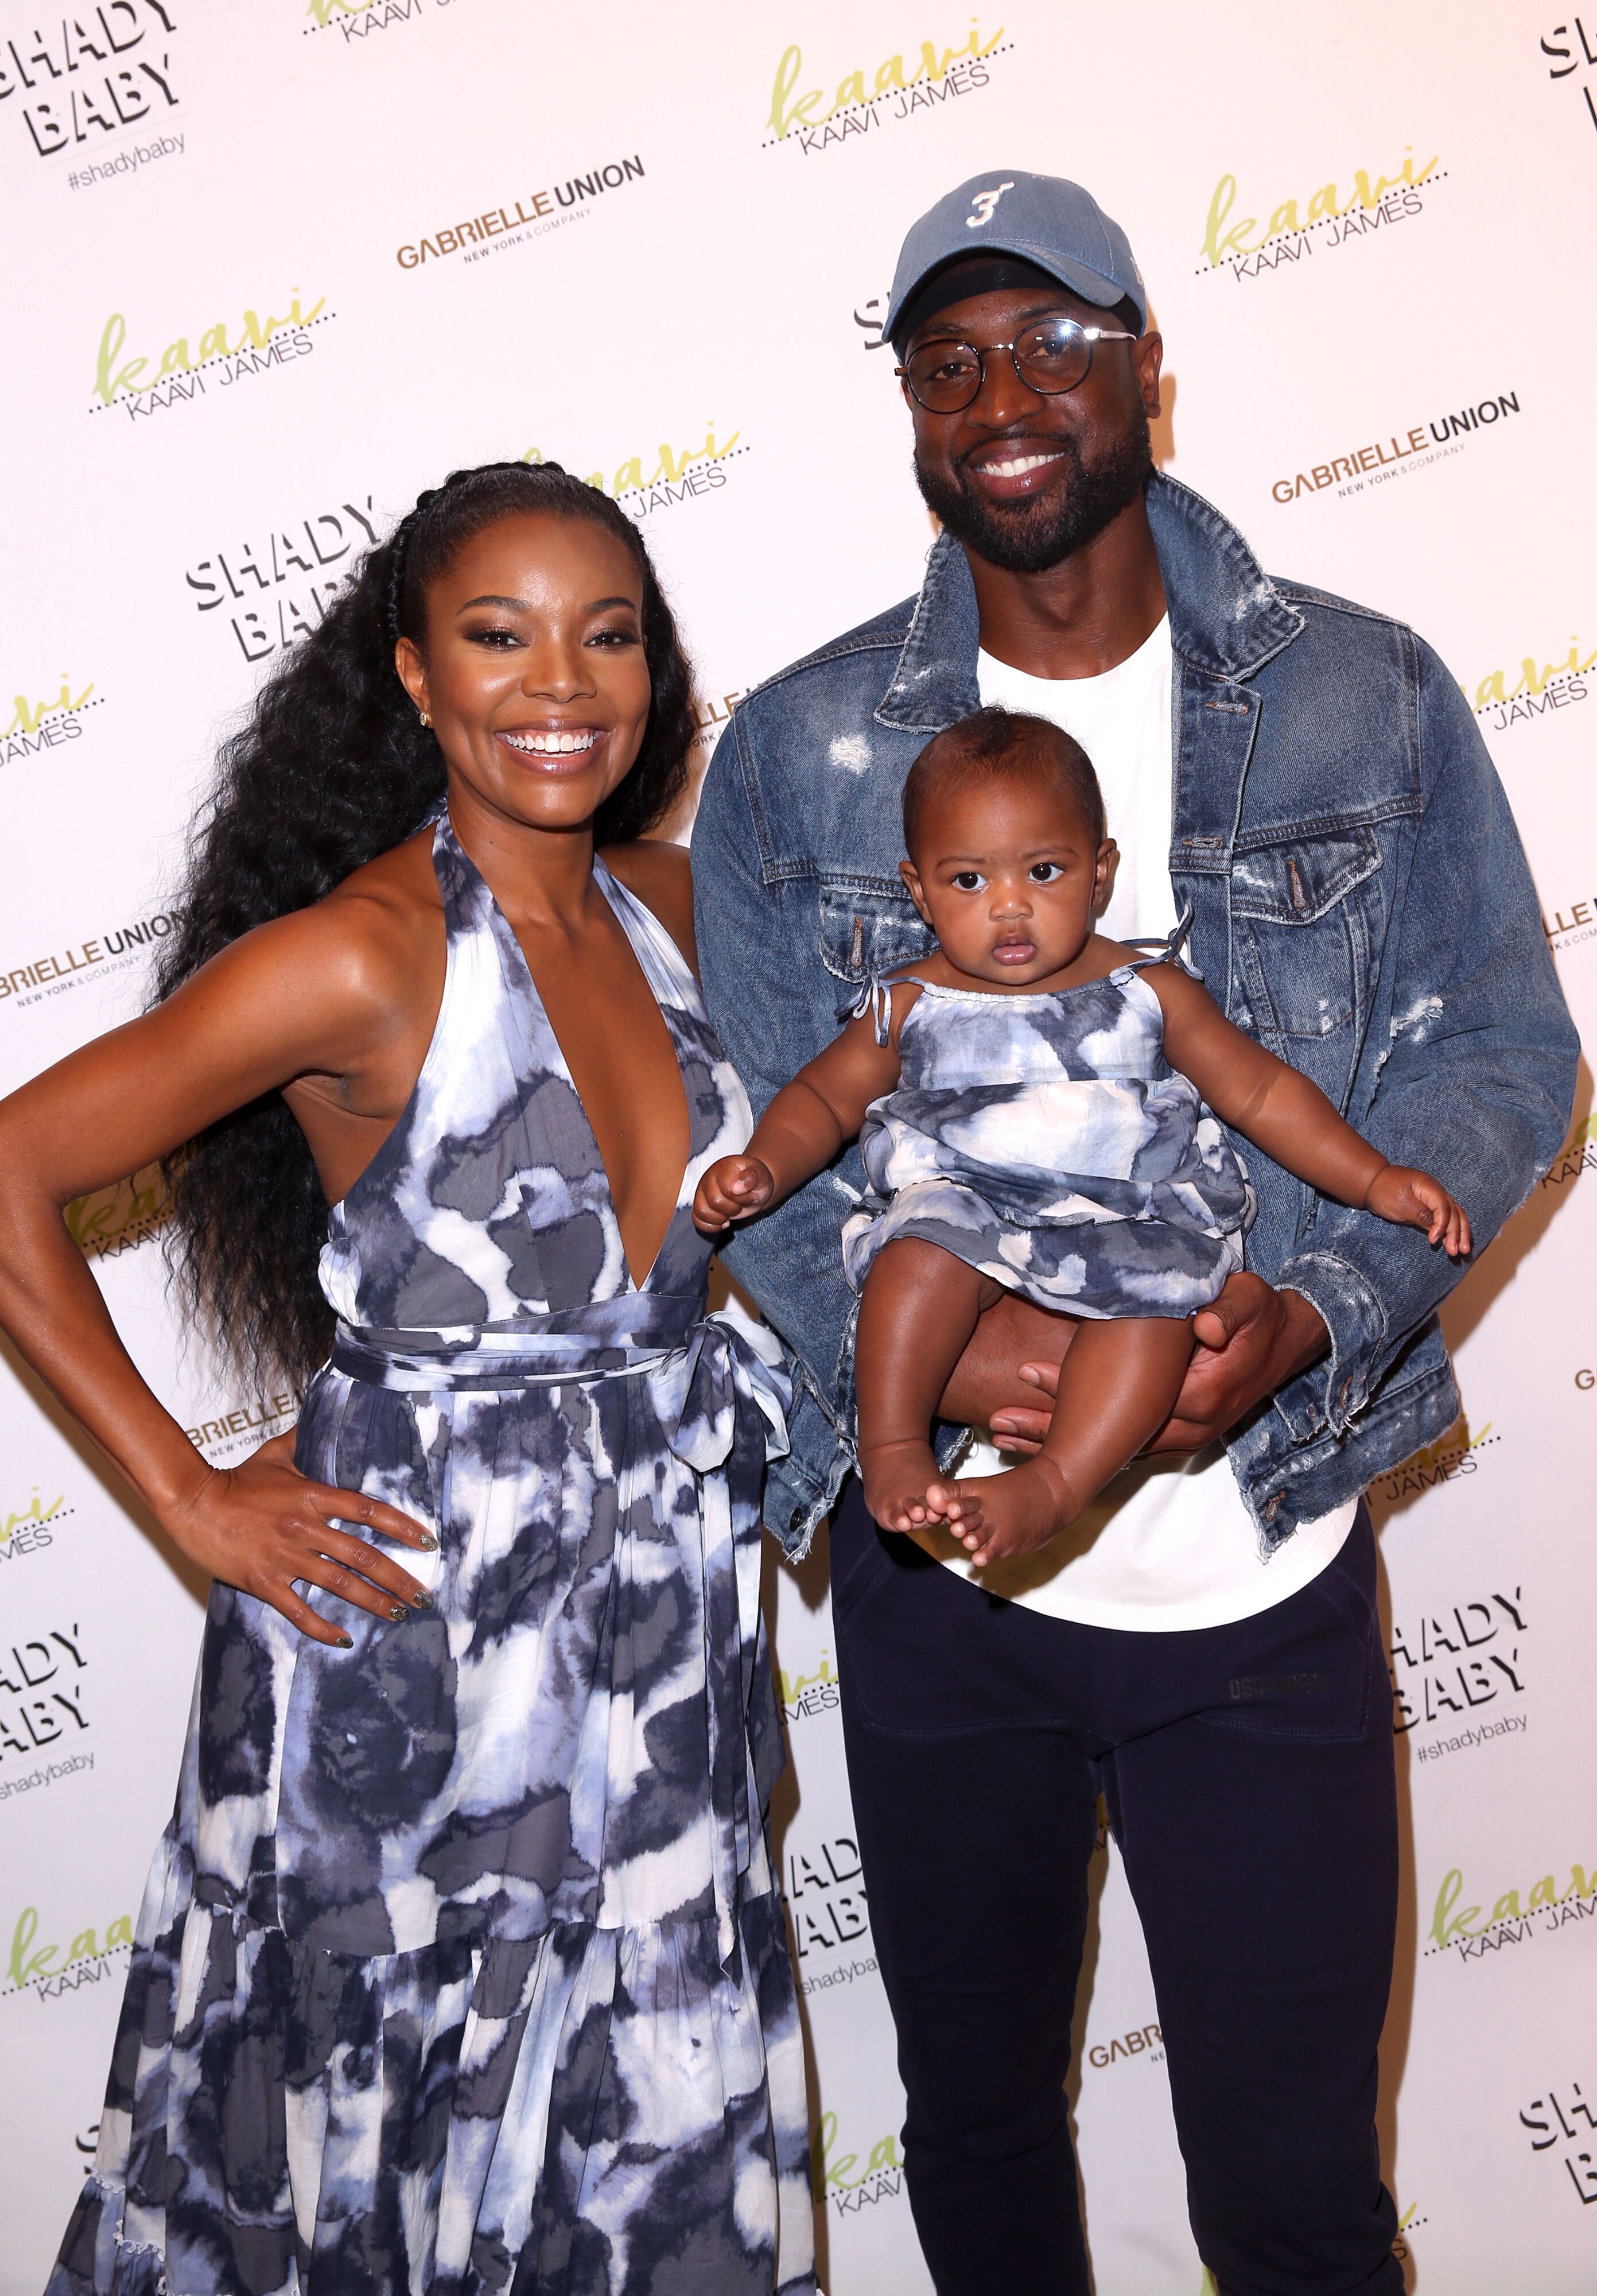 Gabrielle Union S Daughter Kaavia James Is Full Of Joy As She Poses In A Plaid Outfit In Cute Photos